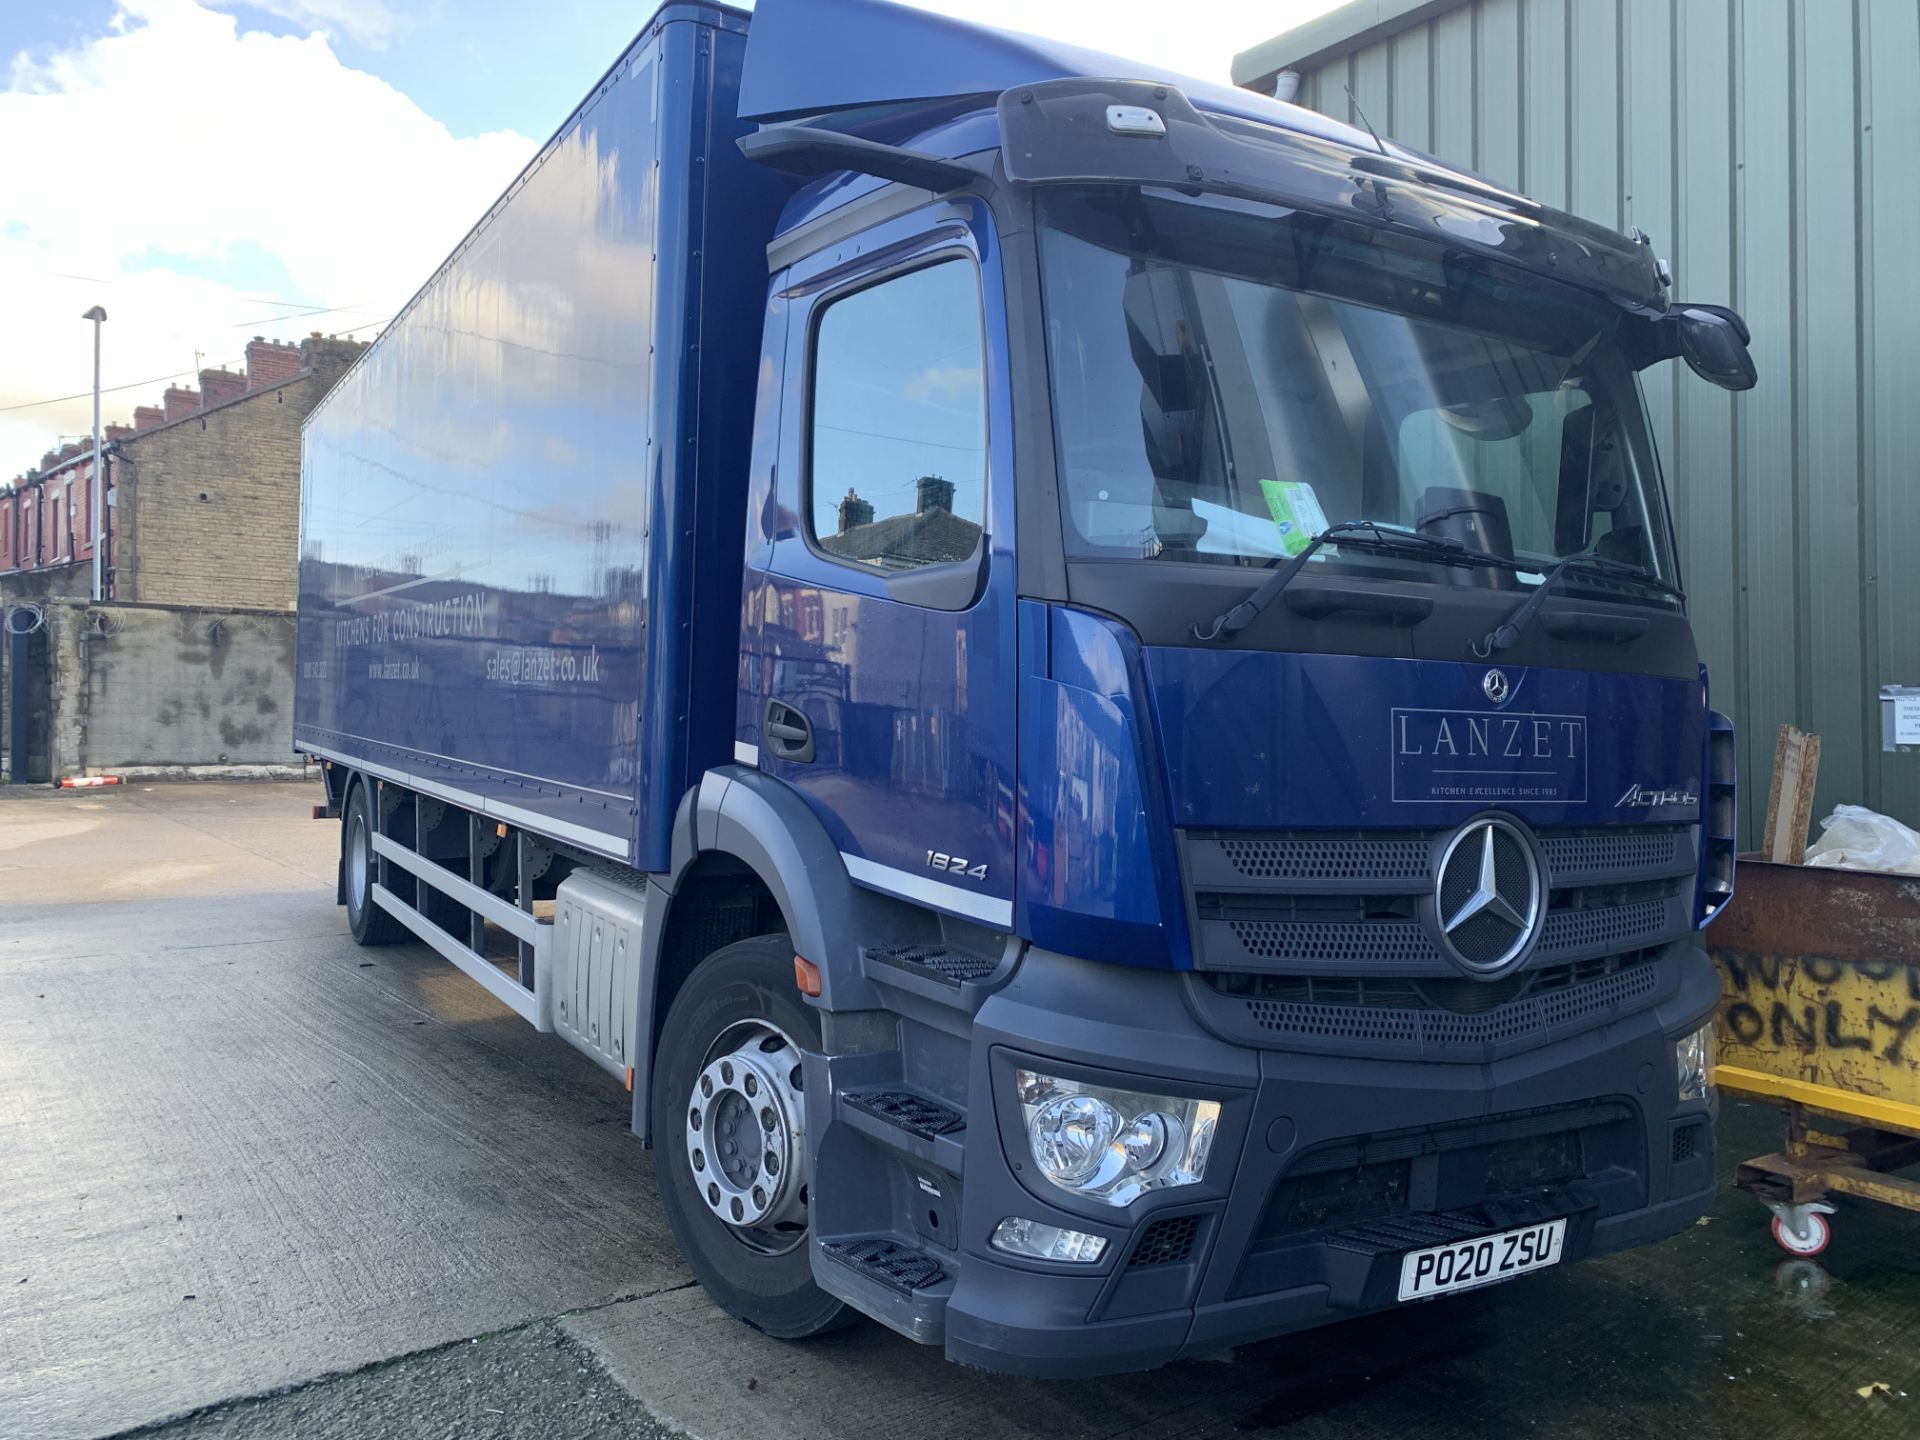 Mercedes Benz Actros 5 1824L S-St-23-320 (Classic) Curtainside 2 - Image 2 of 22